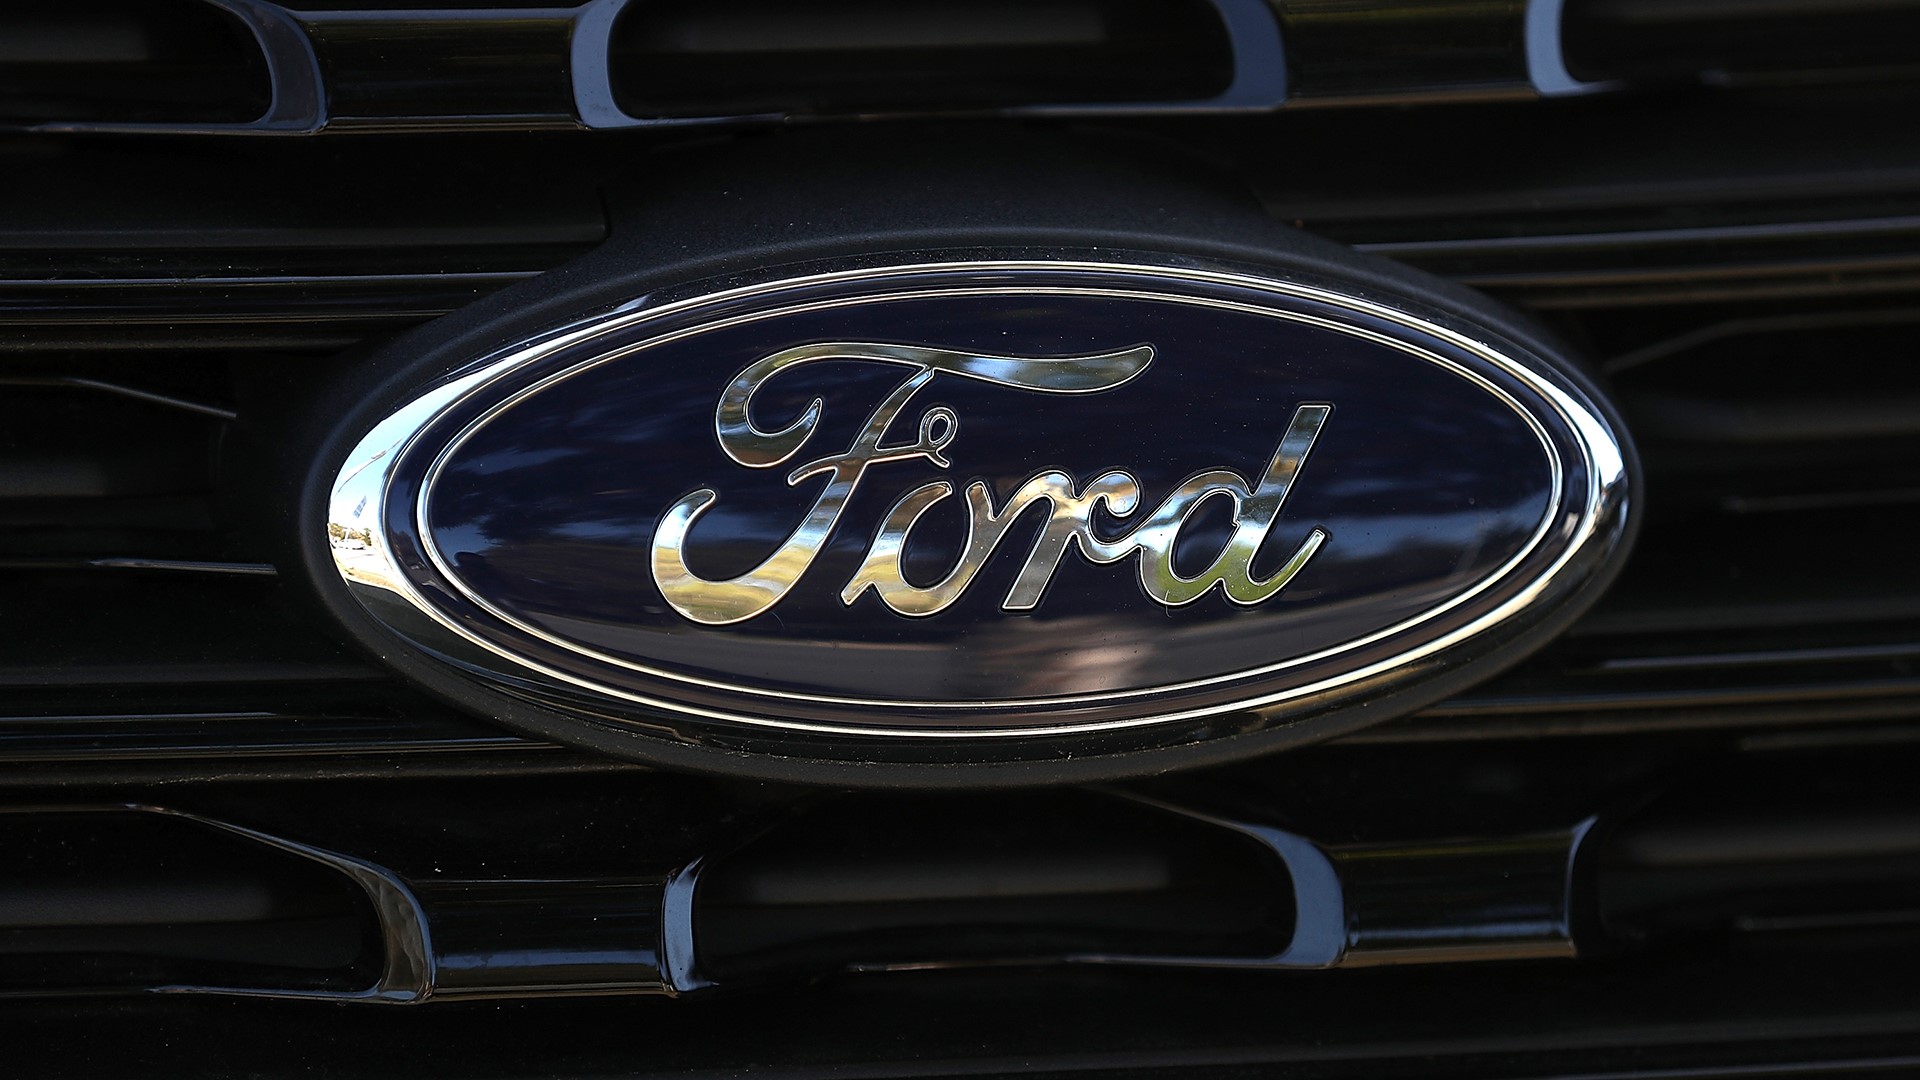 Ford is recalled F-150s because a computer glitch can make the truck shift gears unexpectedly.